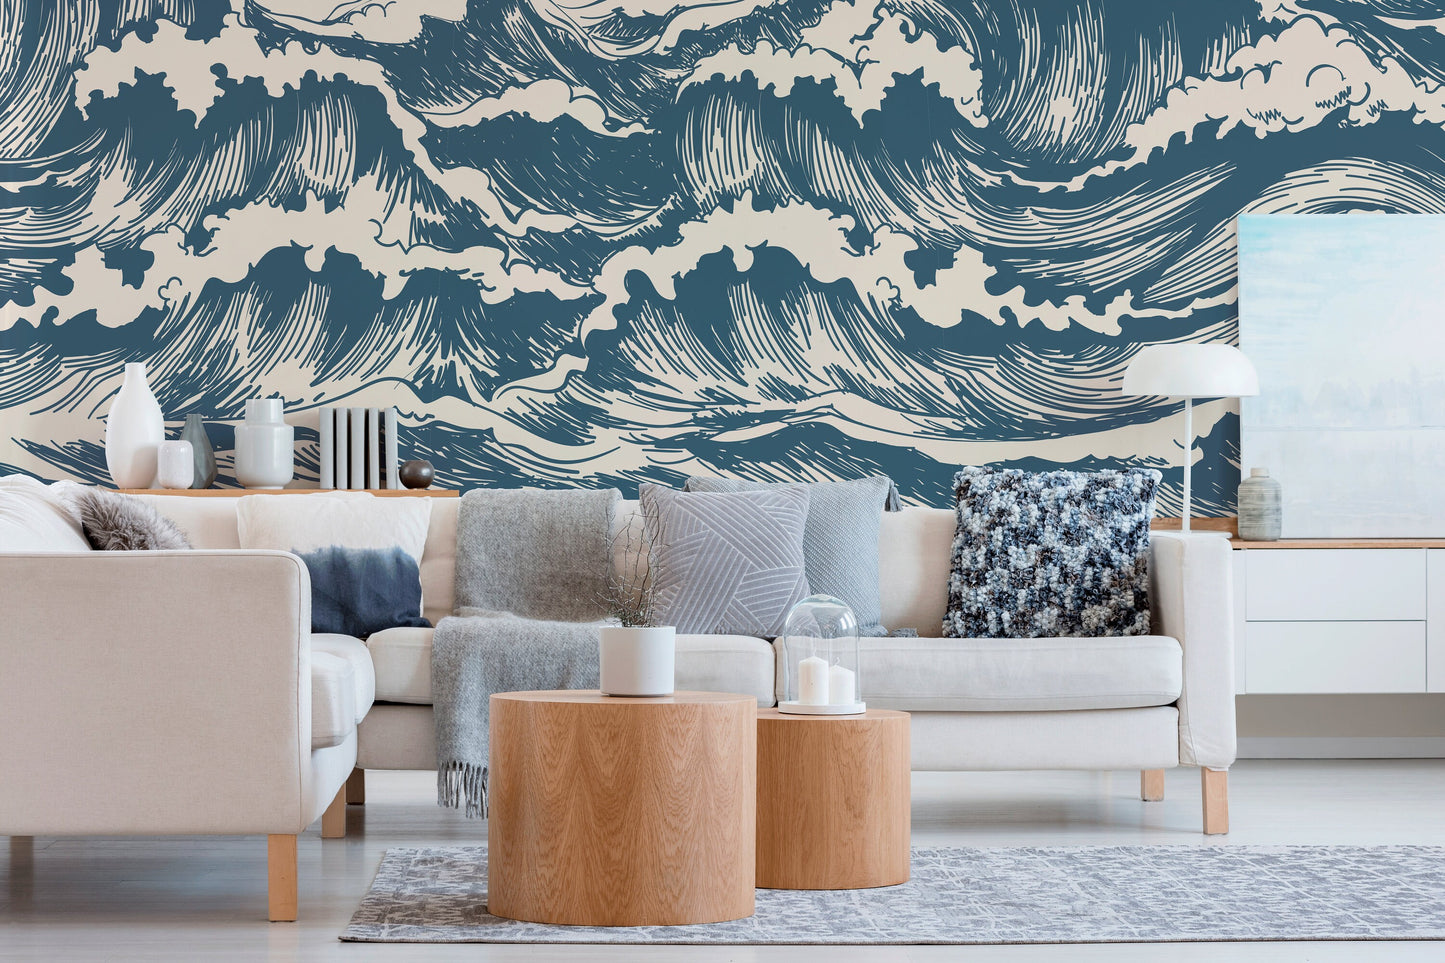 Removable Wallpaper Peaceful Wallpaper Waves Wallpaper Peel and Stick Wallpaper Wall Paper Mural - B256